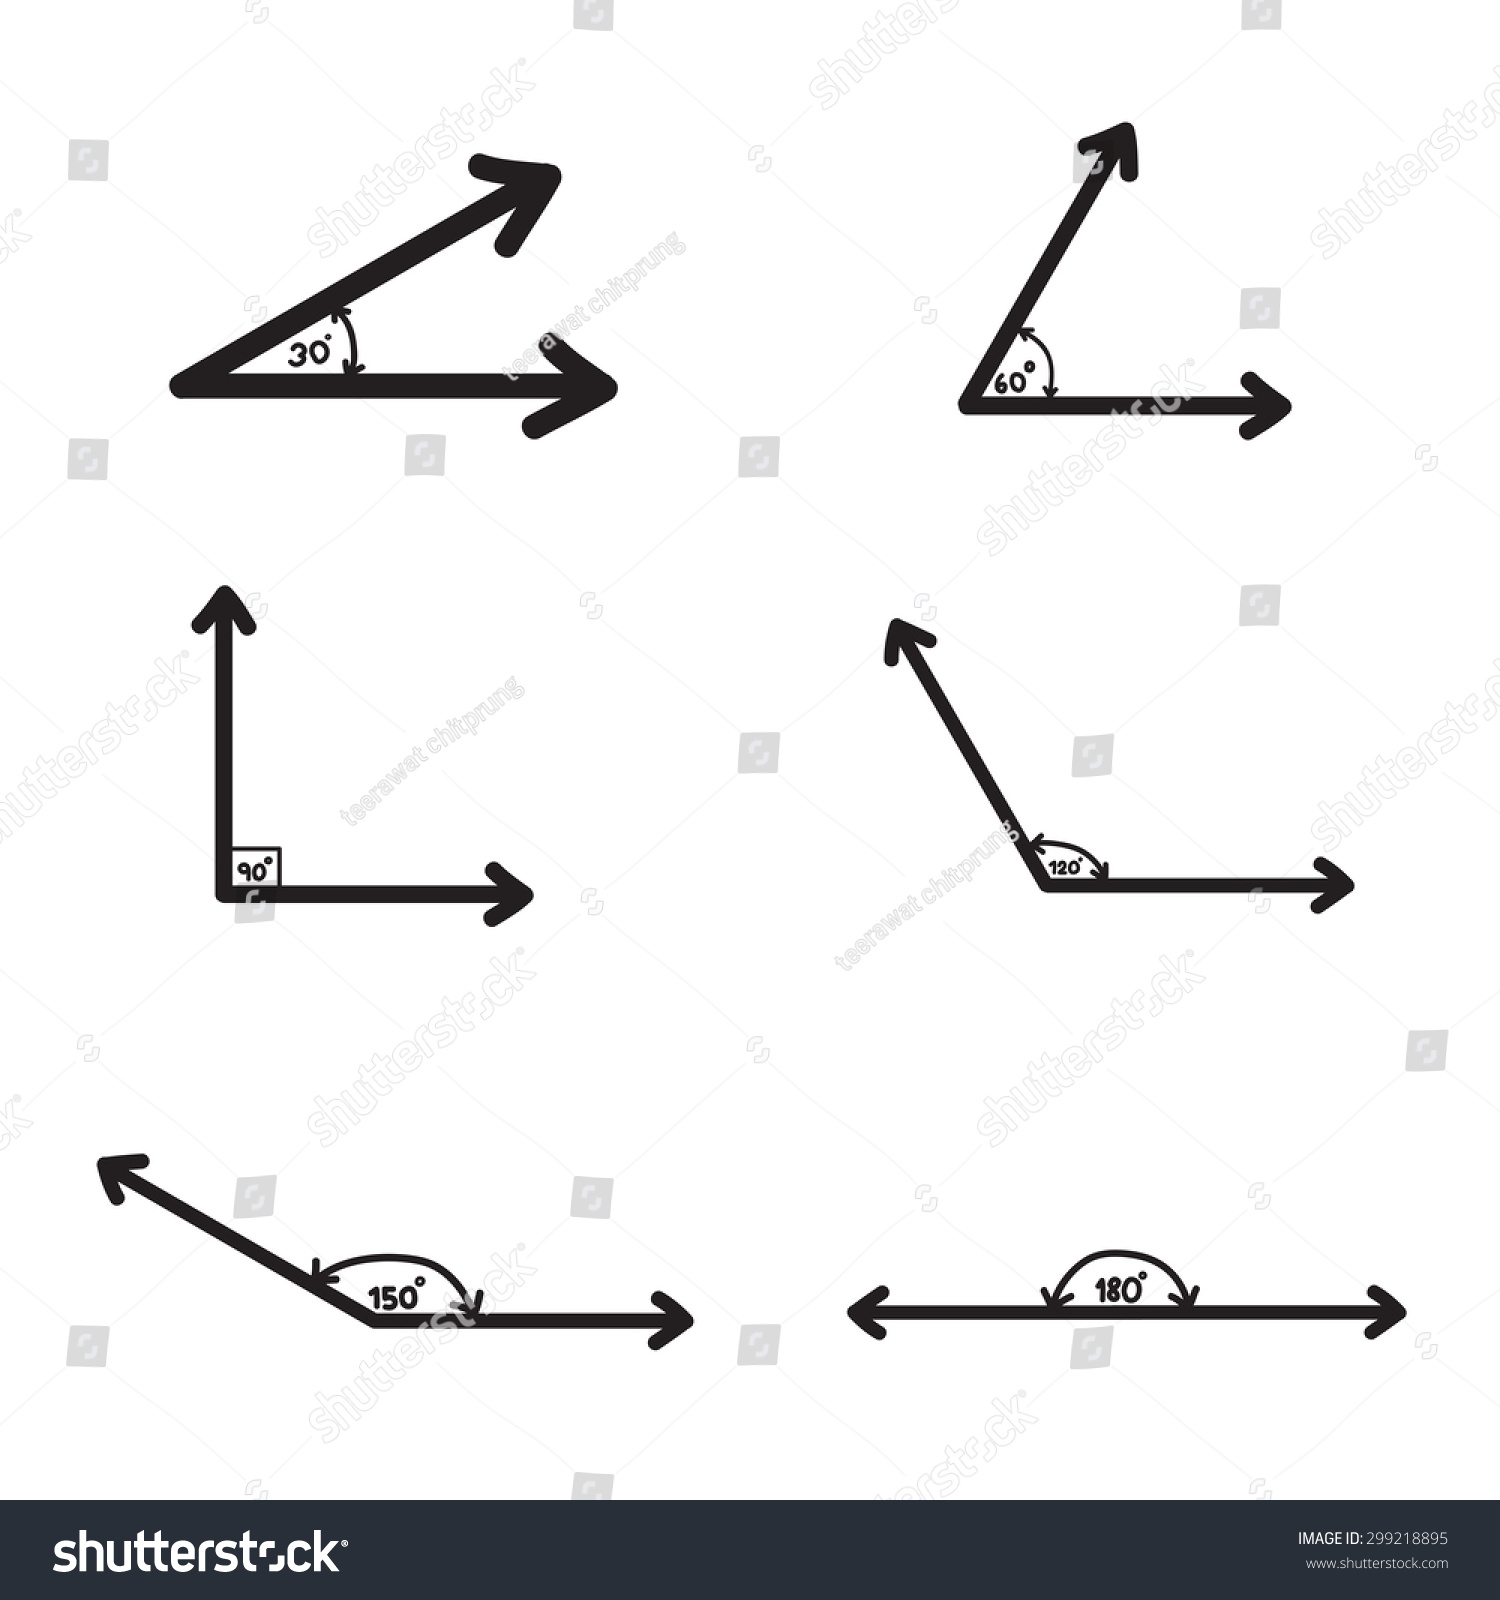 Vector Angle 30-180 Degrees, Geometry Math Signs Symbols - 299218895 ...